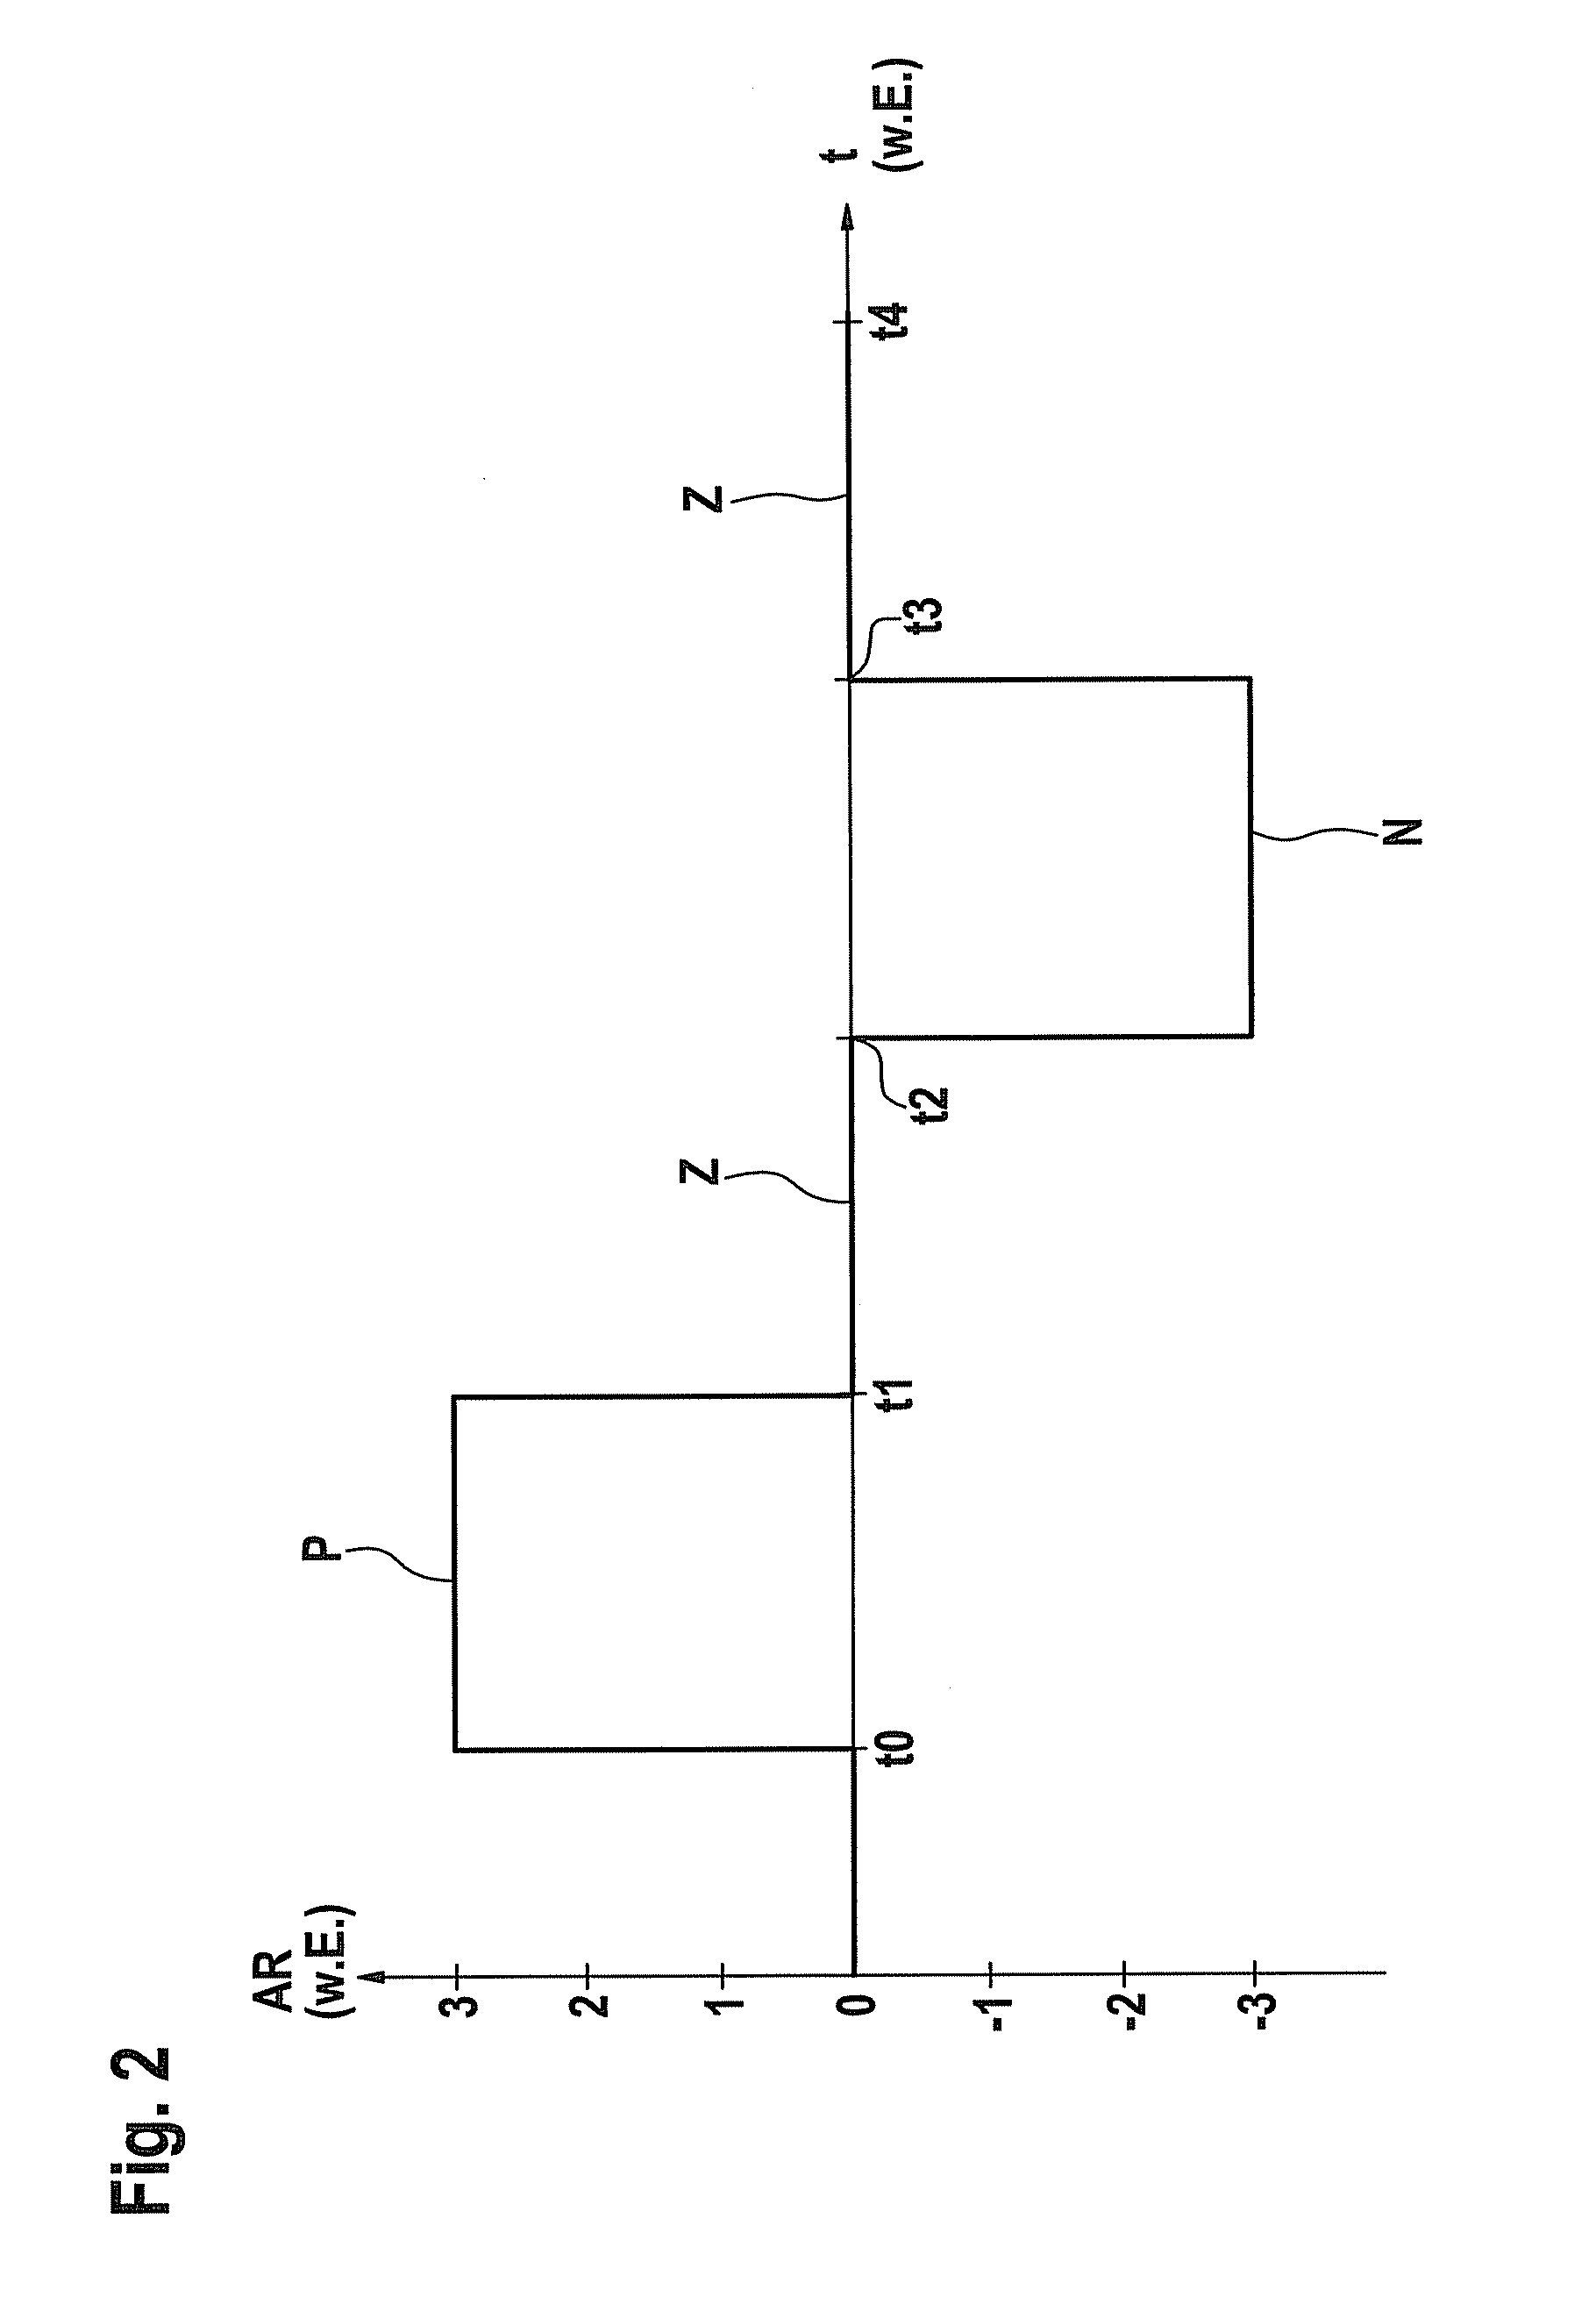 Method for carrying out a self-test for a micromechanical sensor device, and corresponding micromechanical sensor device